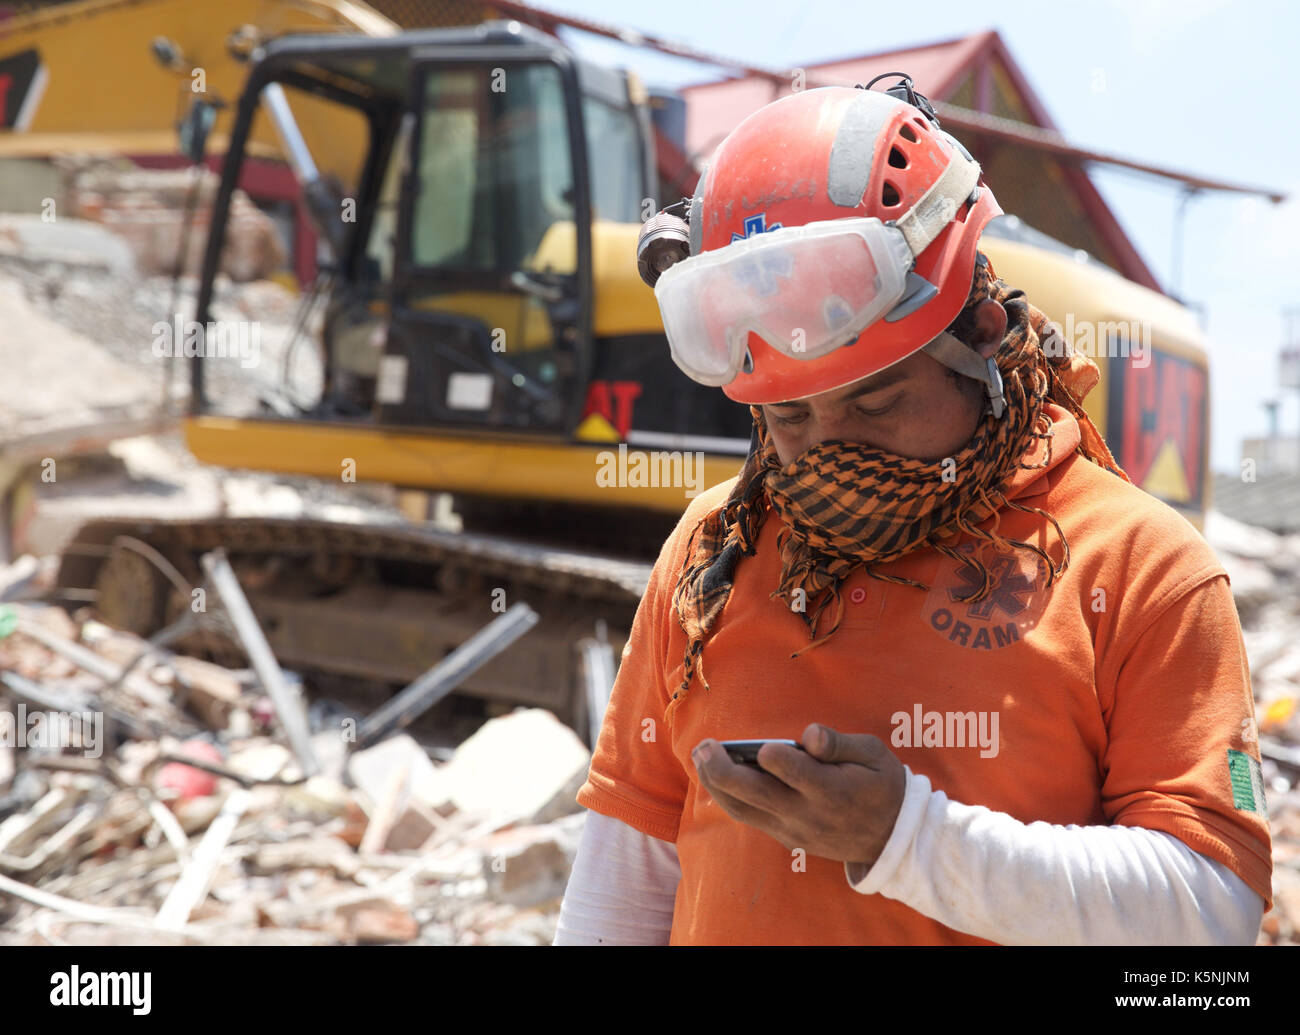 Juchitan, Mexico. 9th September, 2017. A rescue worker takes a rest at the rescue site after an earthquake hit in Juchitan, Oaxaca state, Mexico, Sept. 9, 2017. A powerful earthquake measuring 8.2 on the Richter scale struck off Mexico's southern coast late Thursday night, killing 90 people. Credit: Xinhua/Alamy Live News Stock Photo